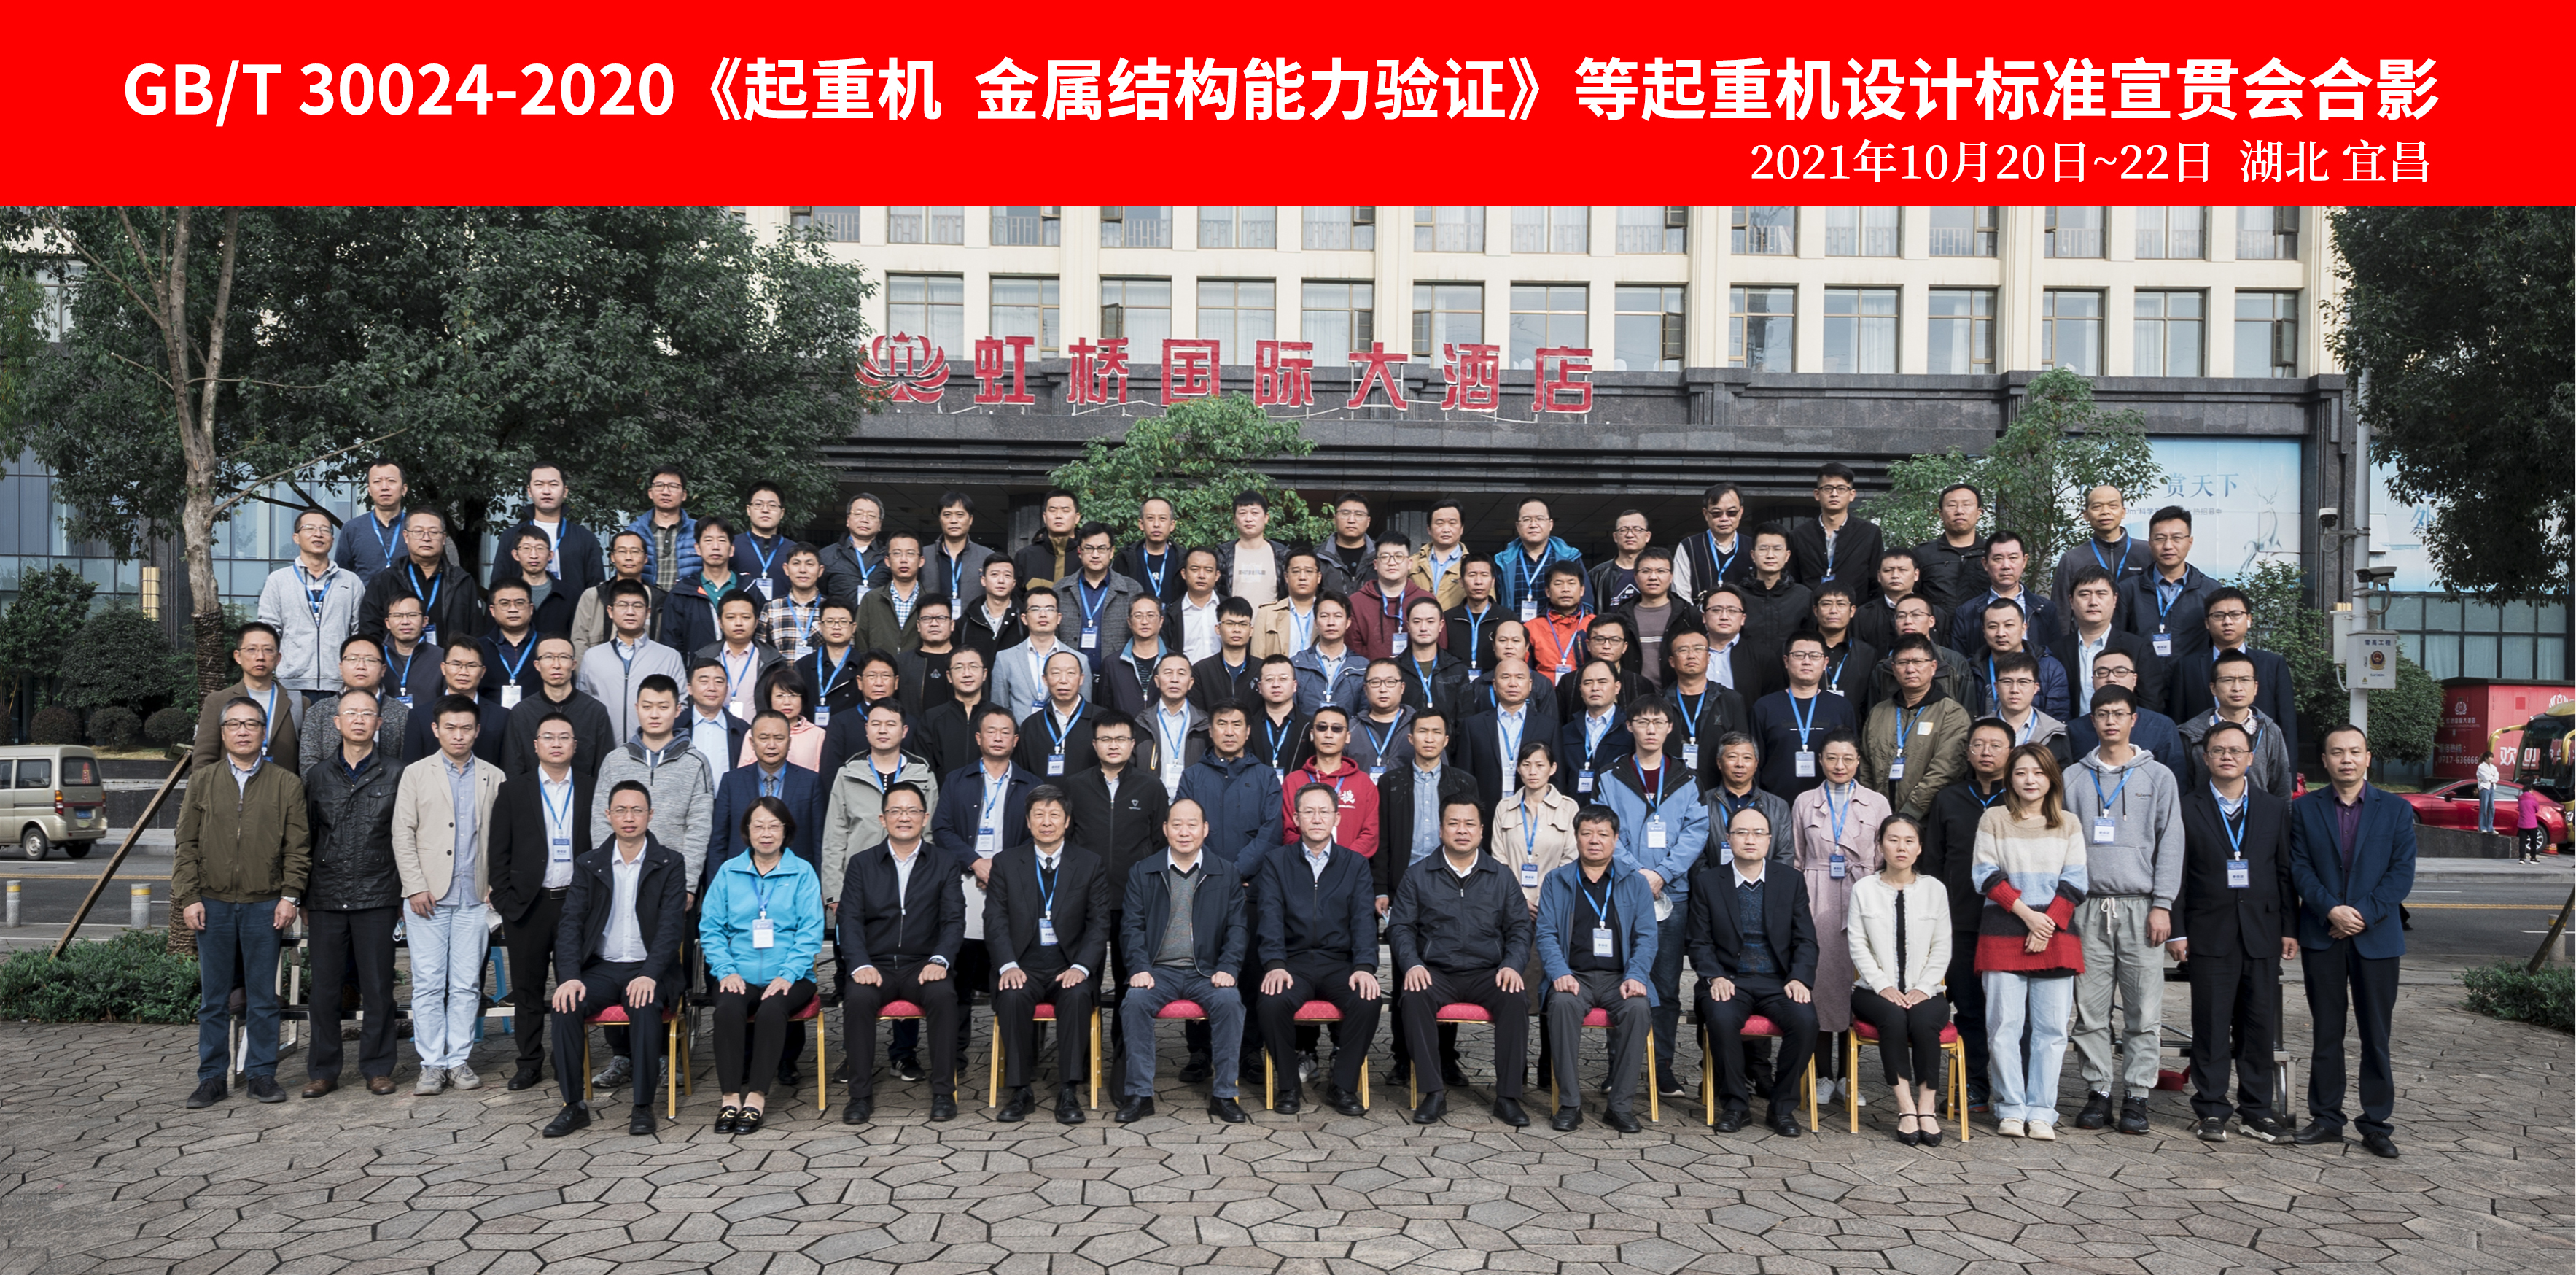 Publicity and implementation of national standards and establishment of industrial norms the publicity and implementation meeting of crane design standards undertaken by Weite was successfully held in Yichang